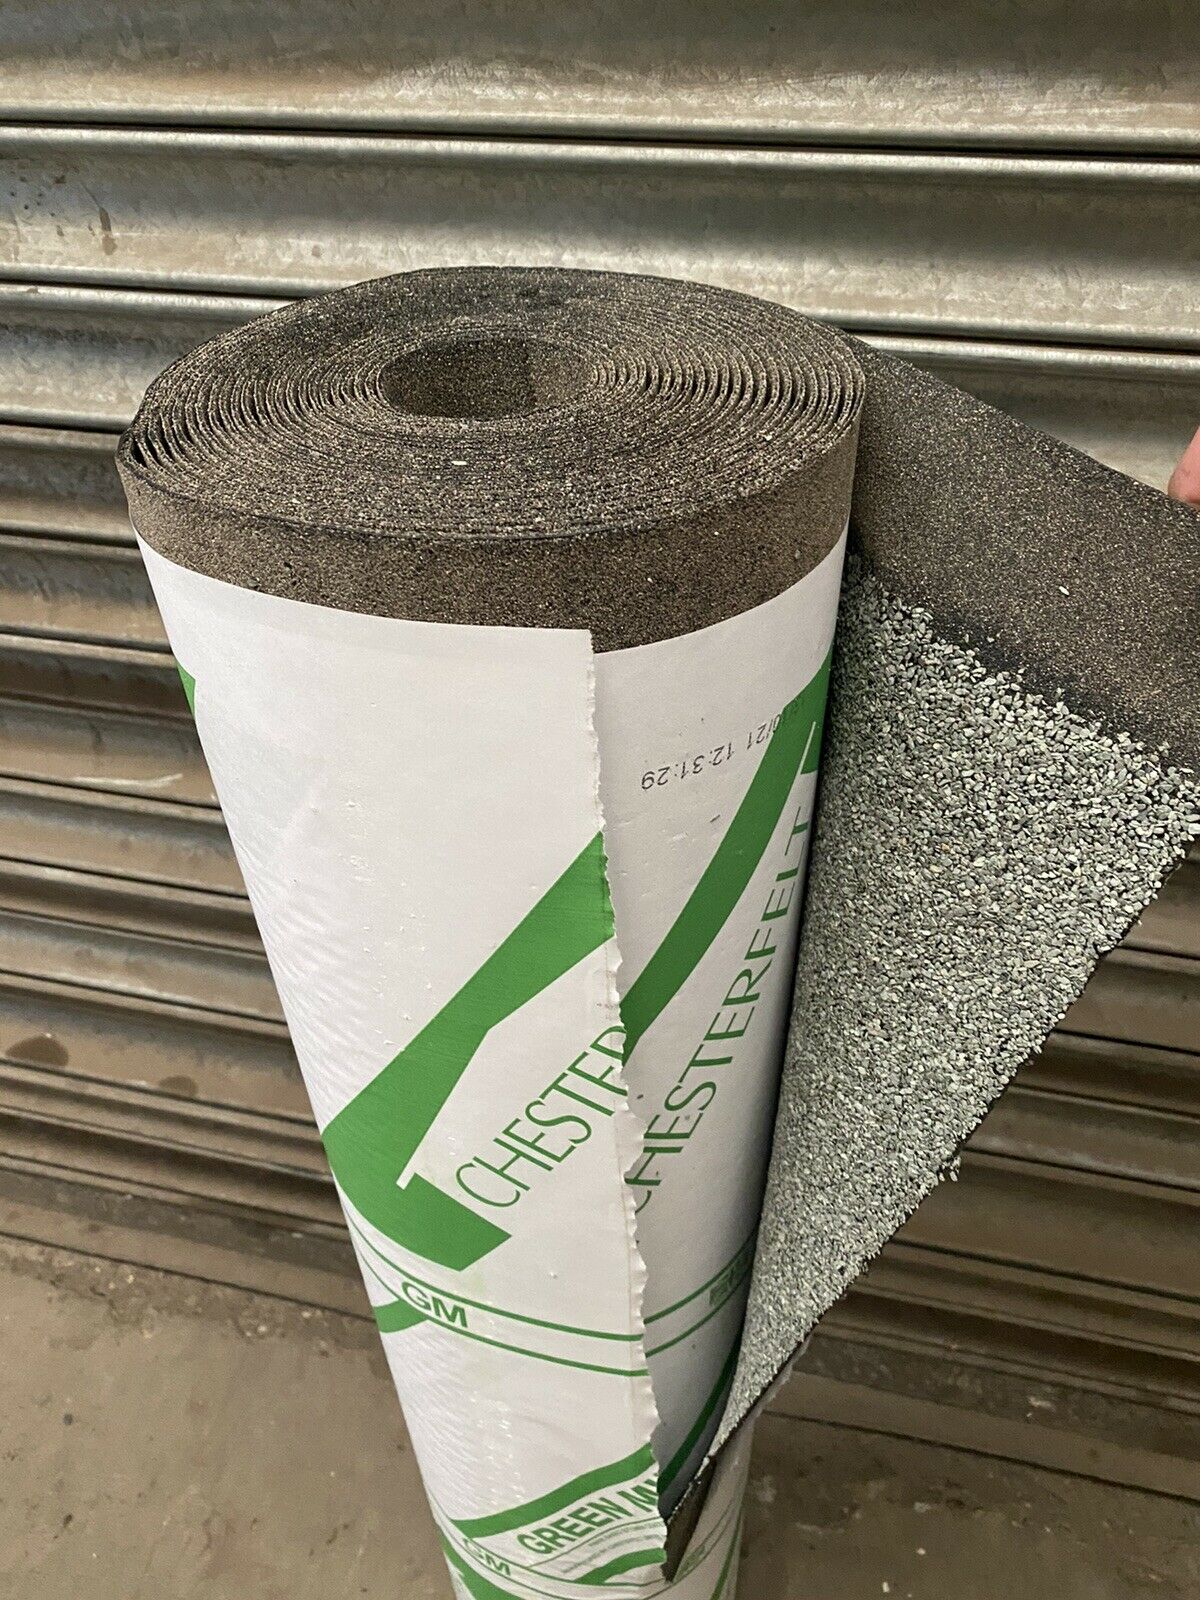 Roll of Green Mineral Felt 10m x 1m, roll opened showing the texture of the felt